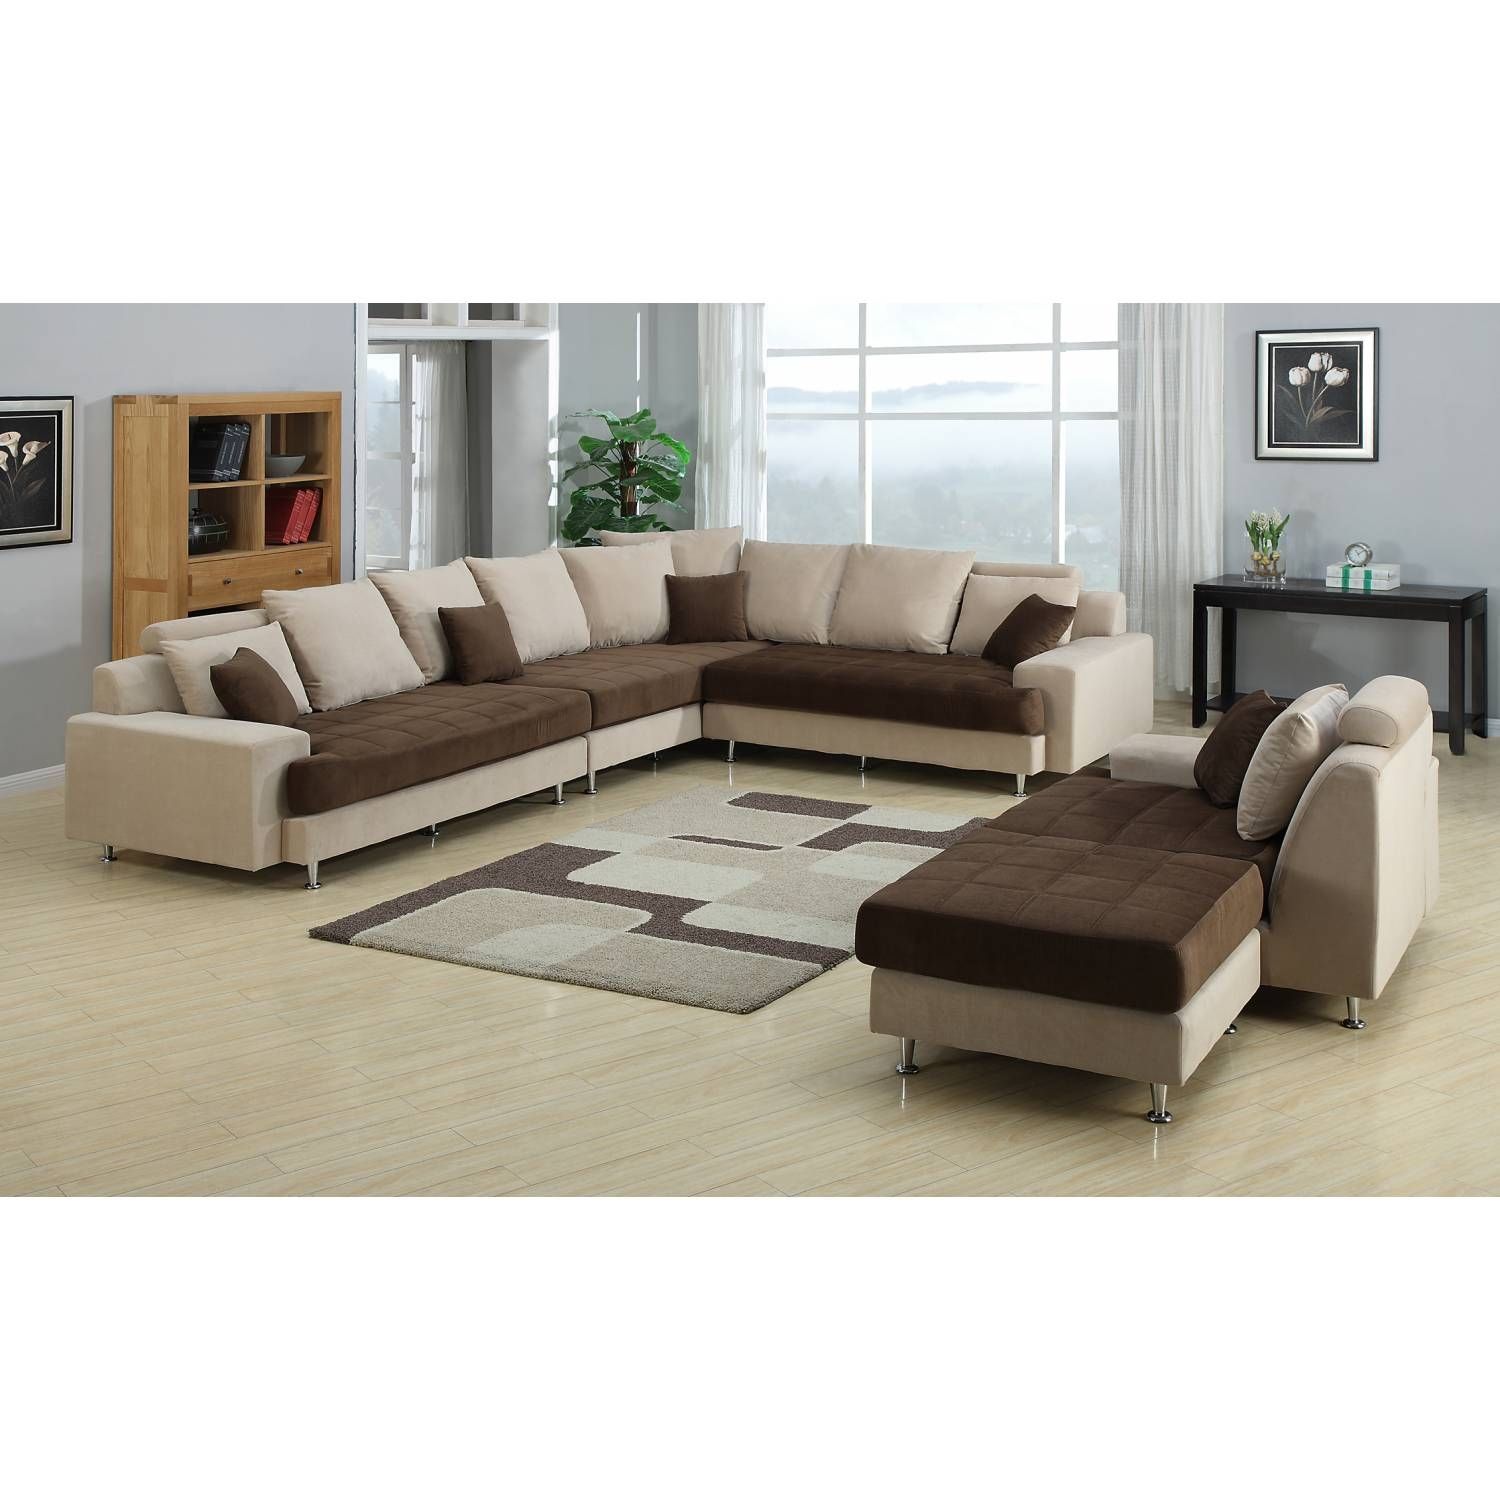 Sectional Sofa With Ottoman – Foter Within 2 Tone Chocolate Microfiber Sofas (Photo 15 of 15)